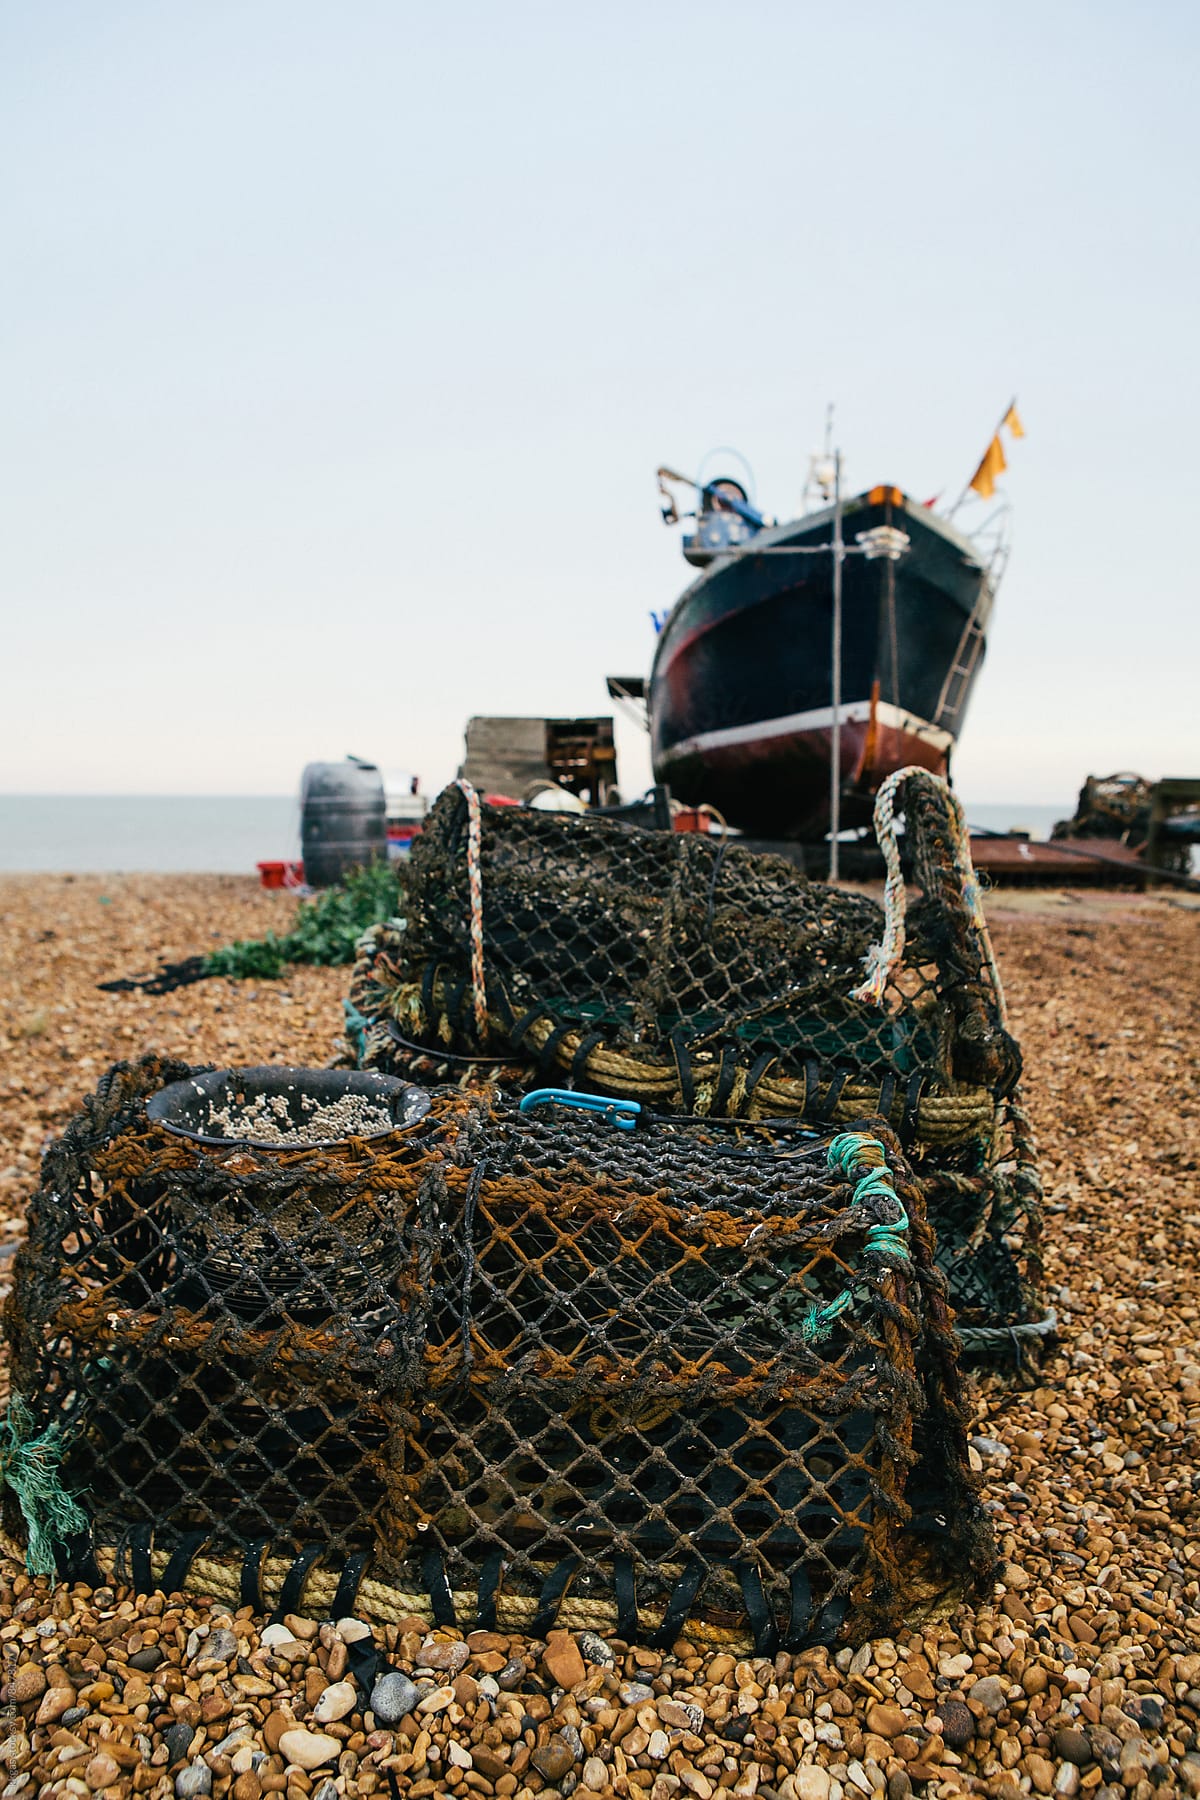 Lobster pots and fishing boat on a quiet beach in Kent.